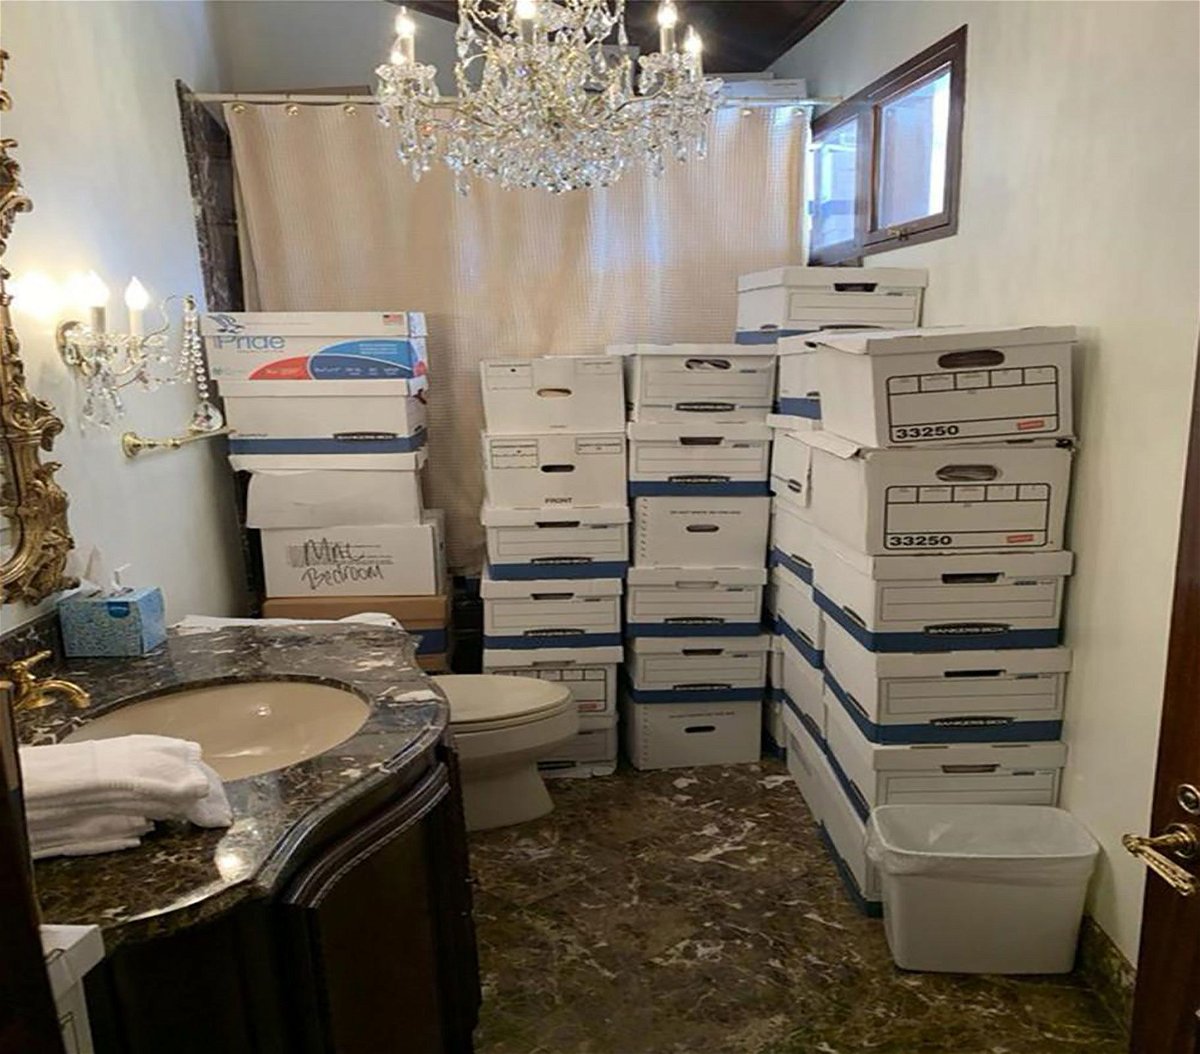 <i>US Department of Justice via CNN Newsource</i><br/>This photo from the US Justice Department shows boxes of classified documents stored in a bathroom and shower in the Mar-a-Lago Club.